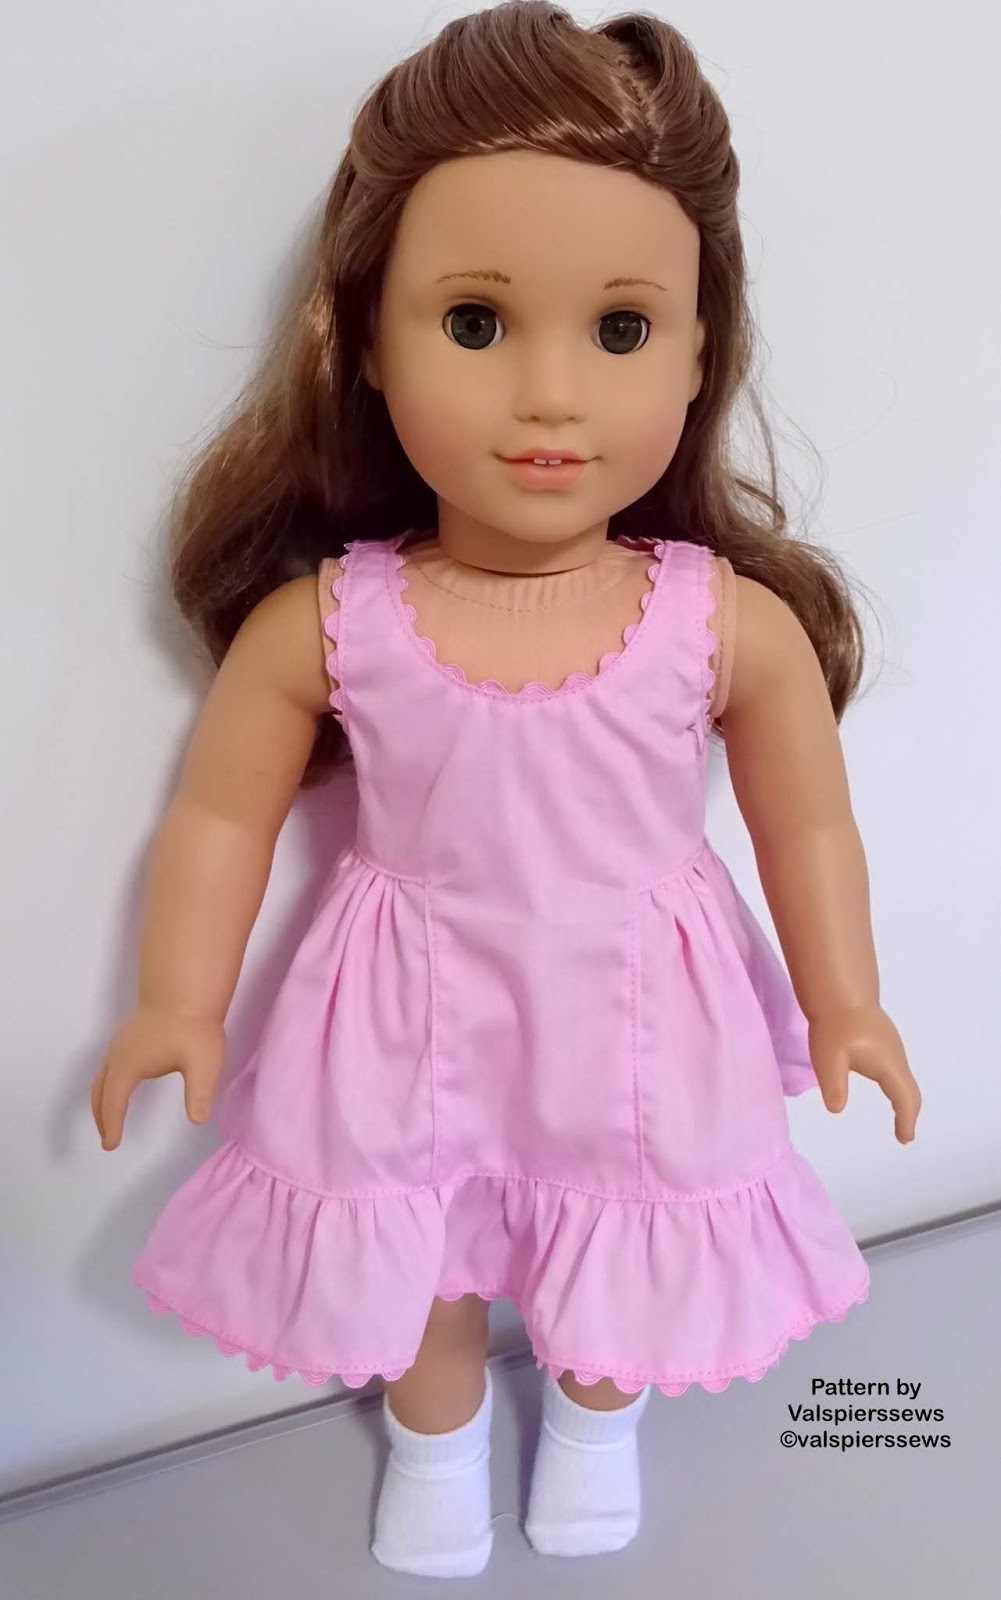 Doll Clothes Patterns by Valspierssews: 2019